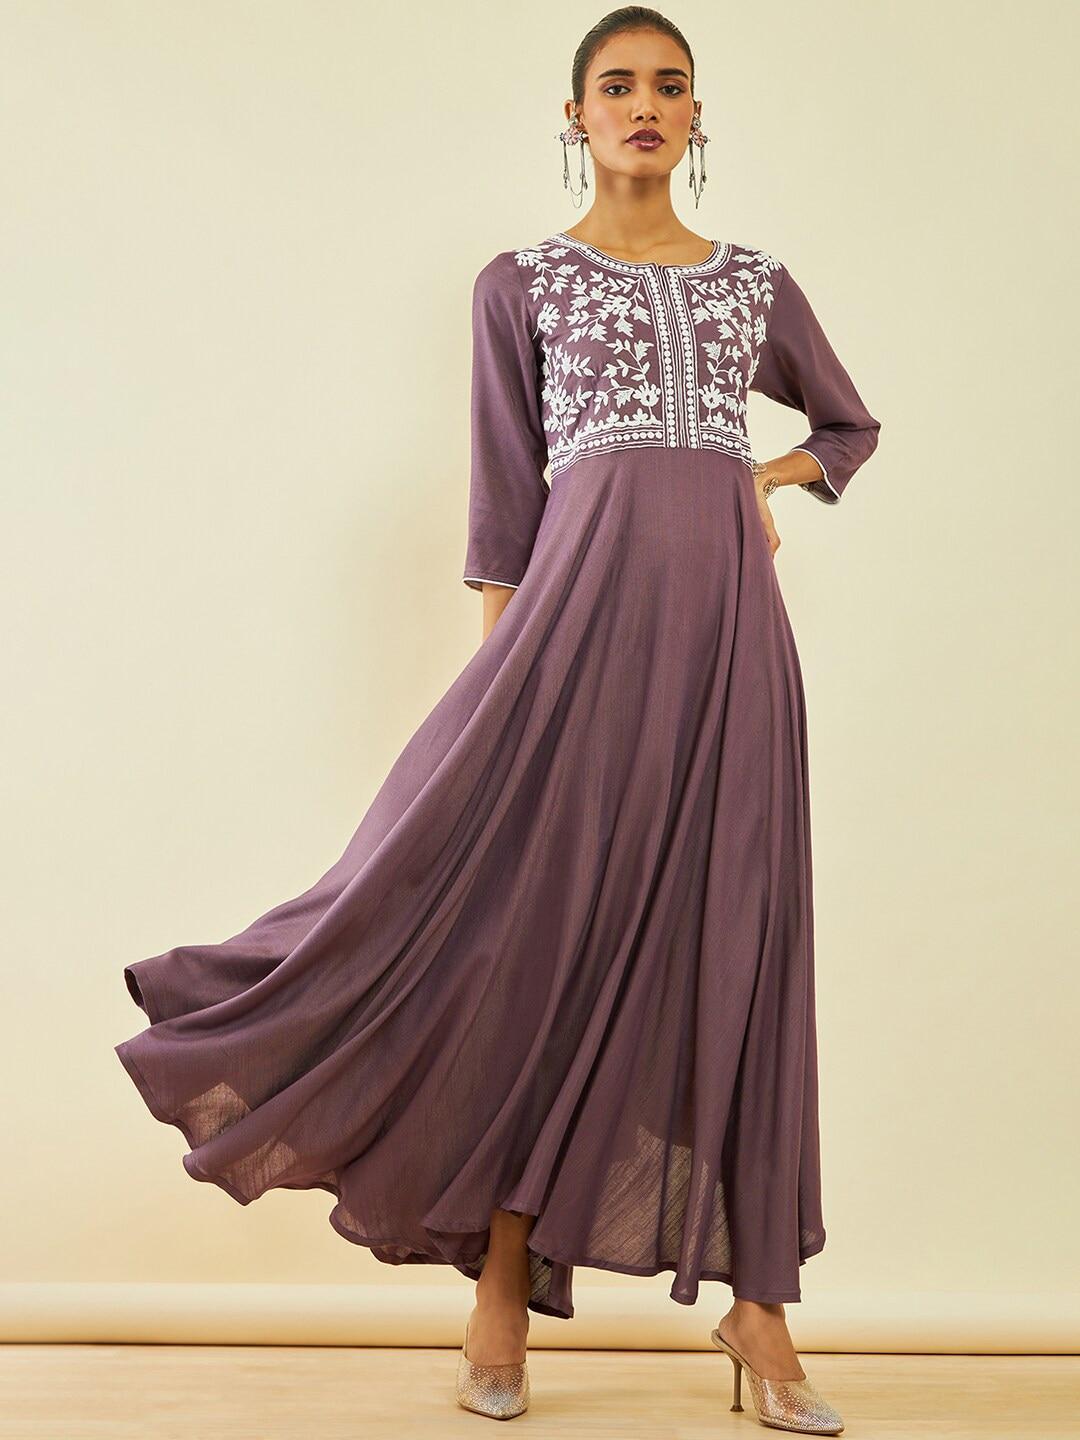 soch-floral-embroidered-round-neck-maxi-ethnic-dresses